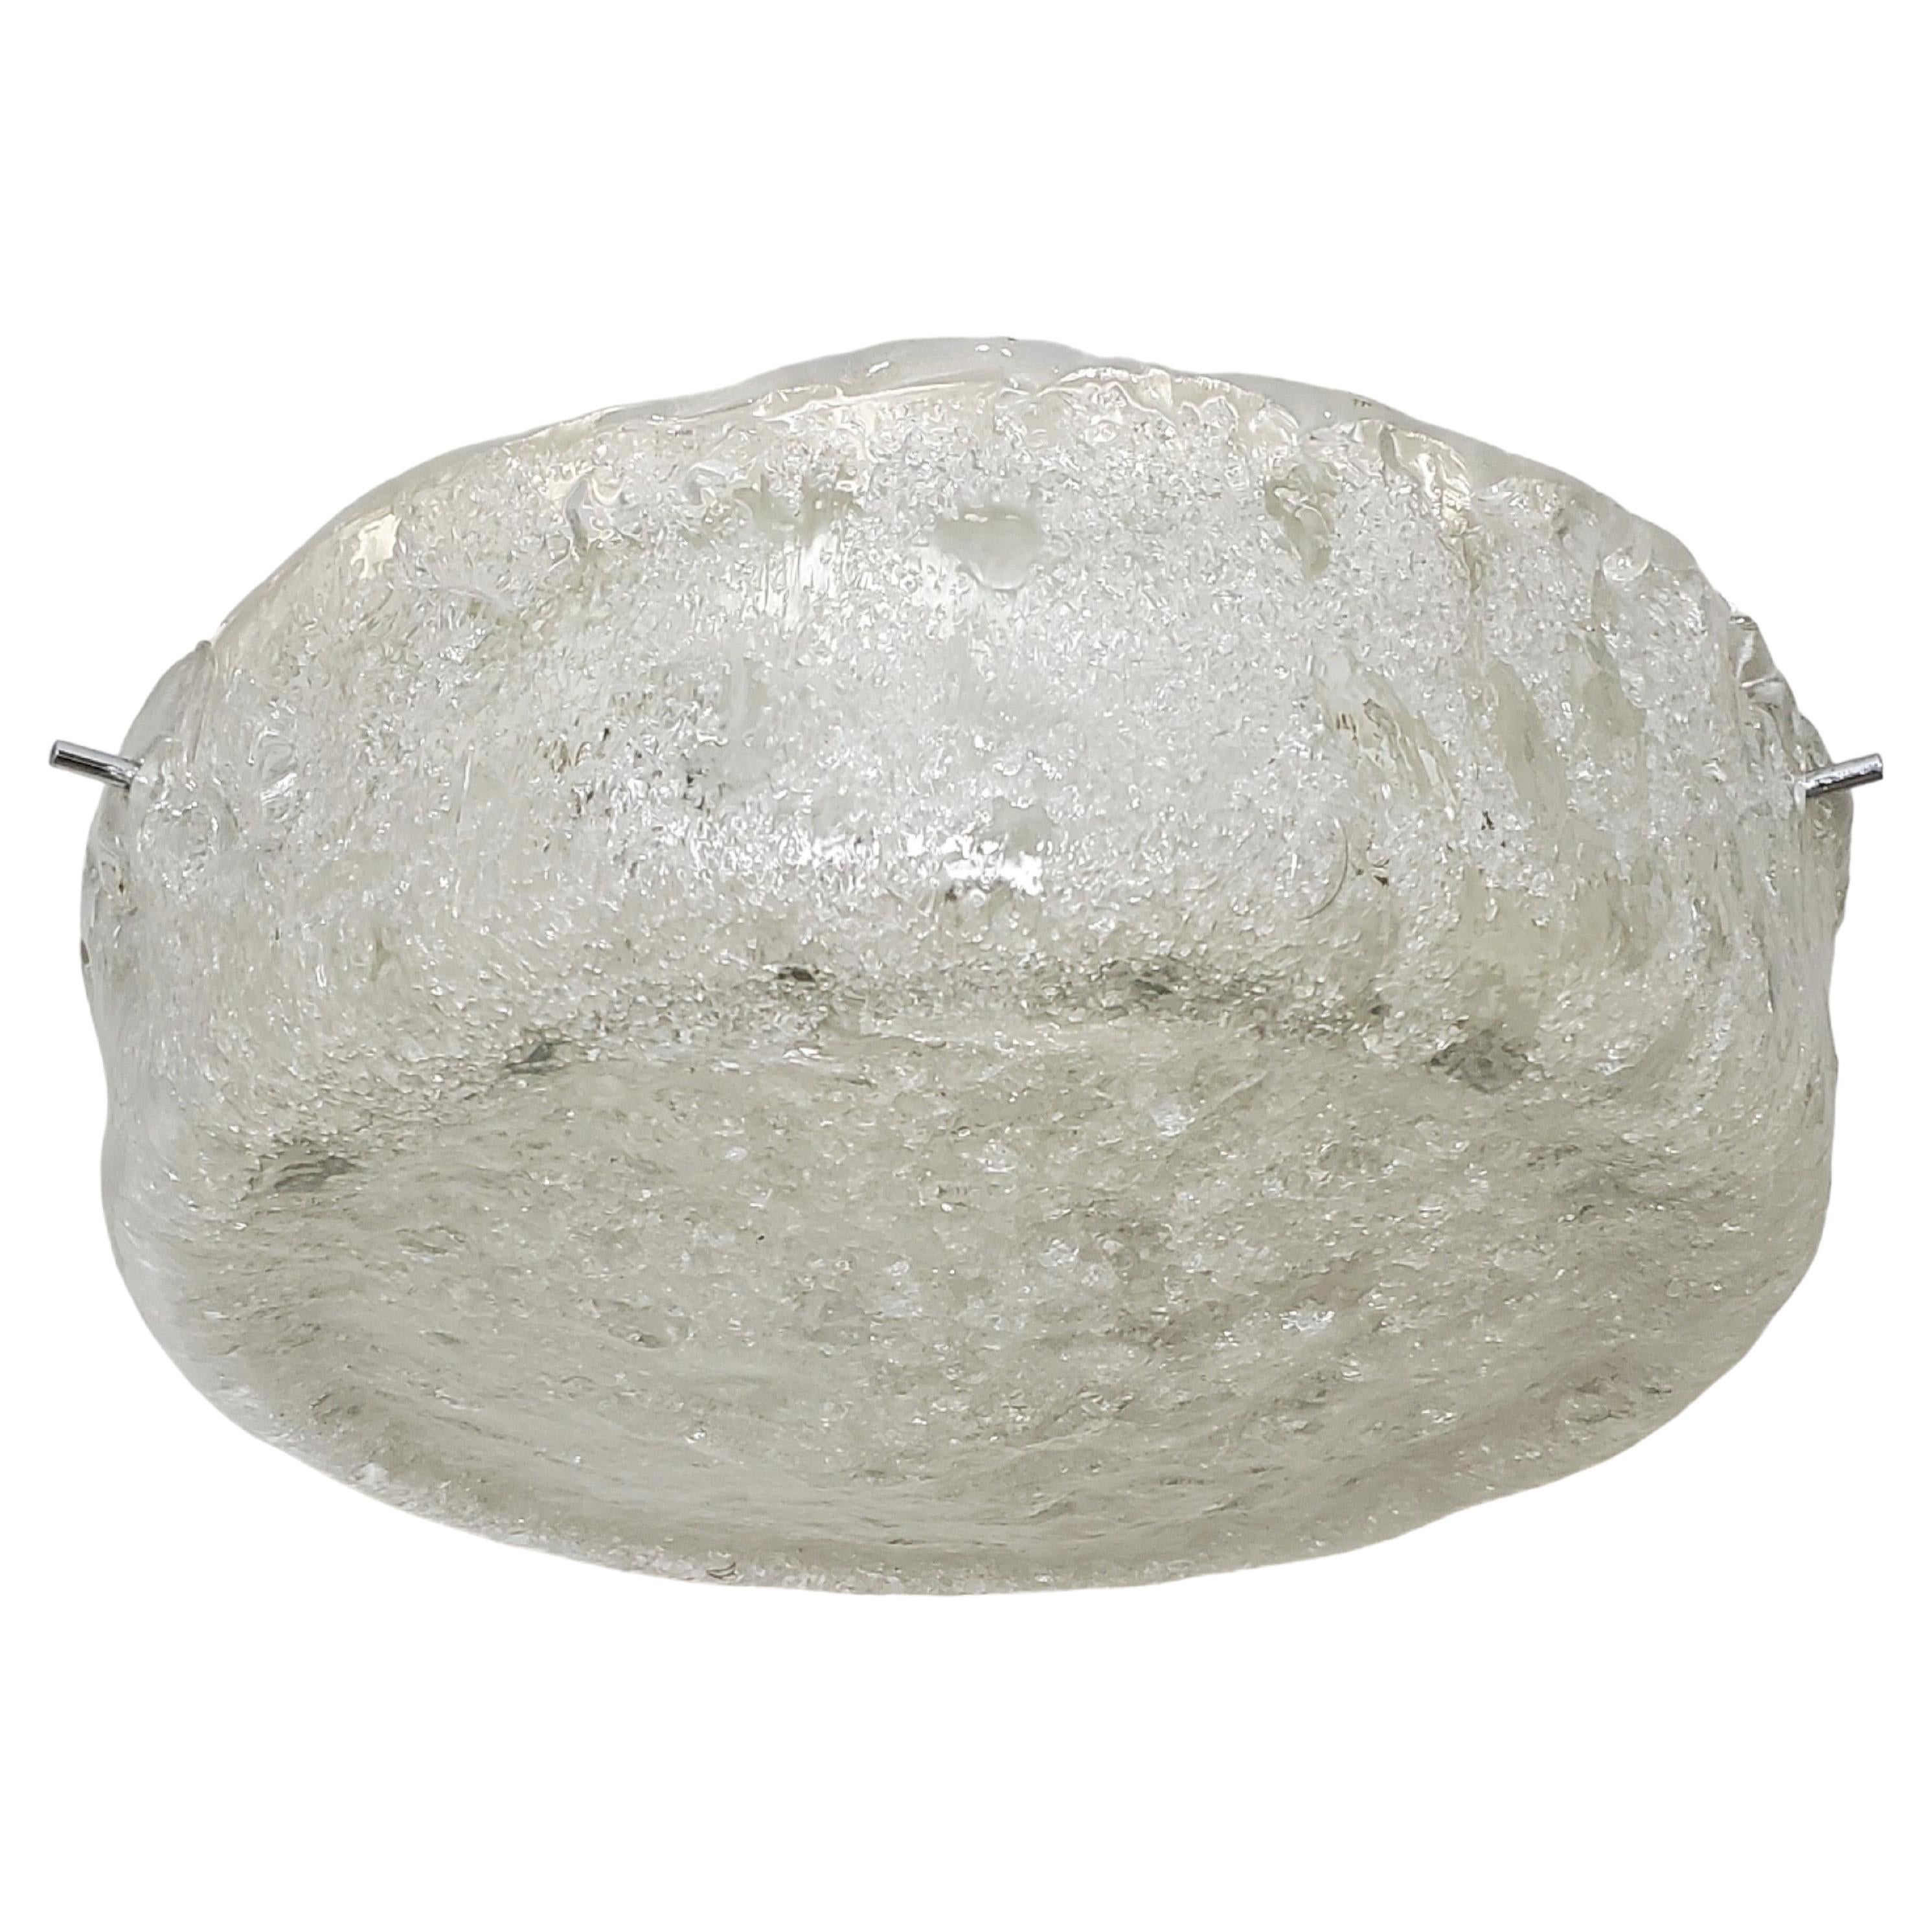  Mid-Century Modern round flush mount, circa ~1965,  attributed to Kaiser Leuchten showcases a thick, handmade glass shade. 
The shade, characterized by a clear and frosted textural surface, undulates and curves with consistent smoothness,